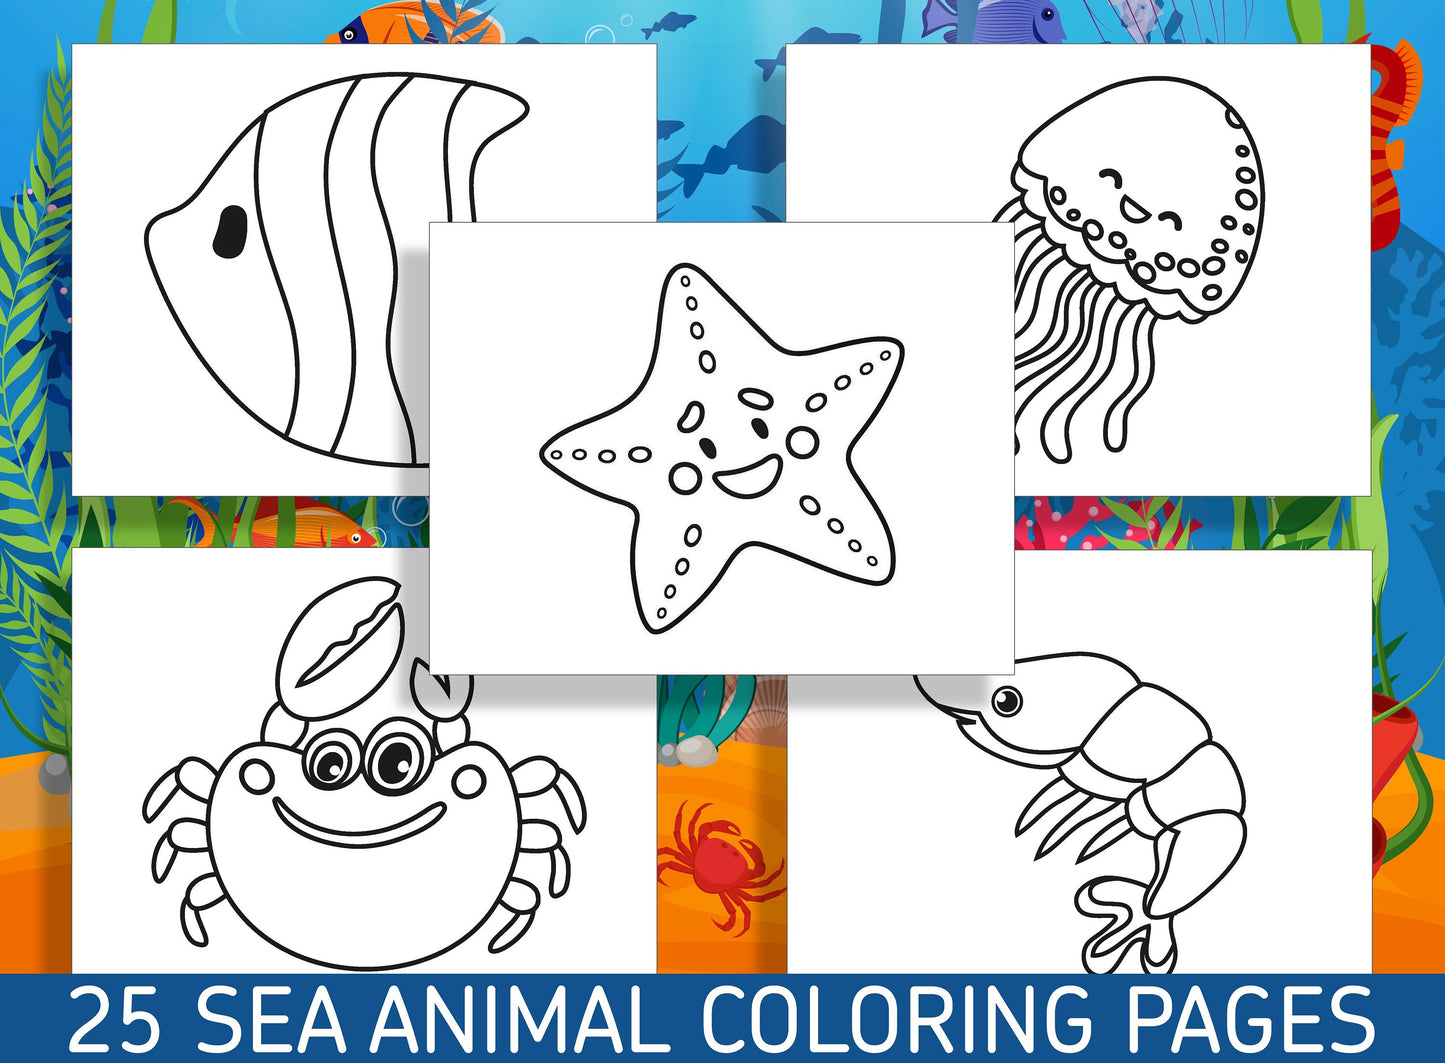 Explore the Wonders of the Sea with 25 Adorable Coloring Pages - Ideal for Kindergarten and Preschool! - PDF File, Instant Download